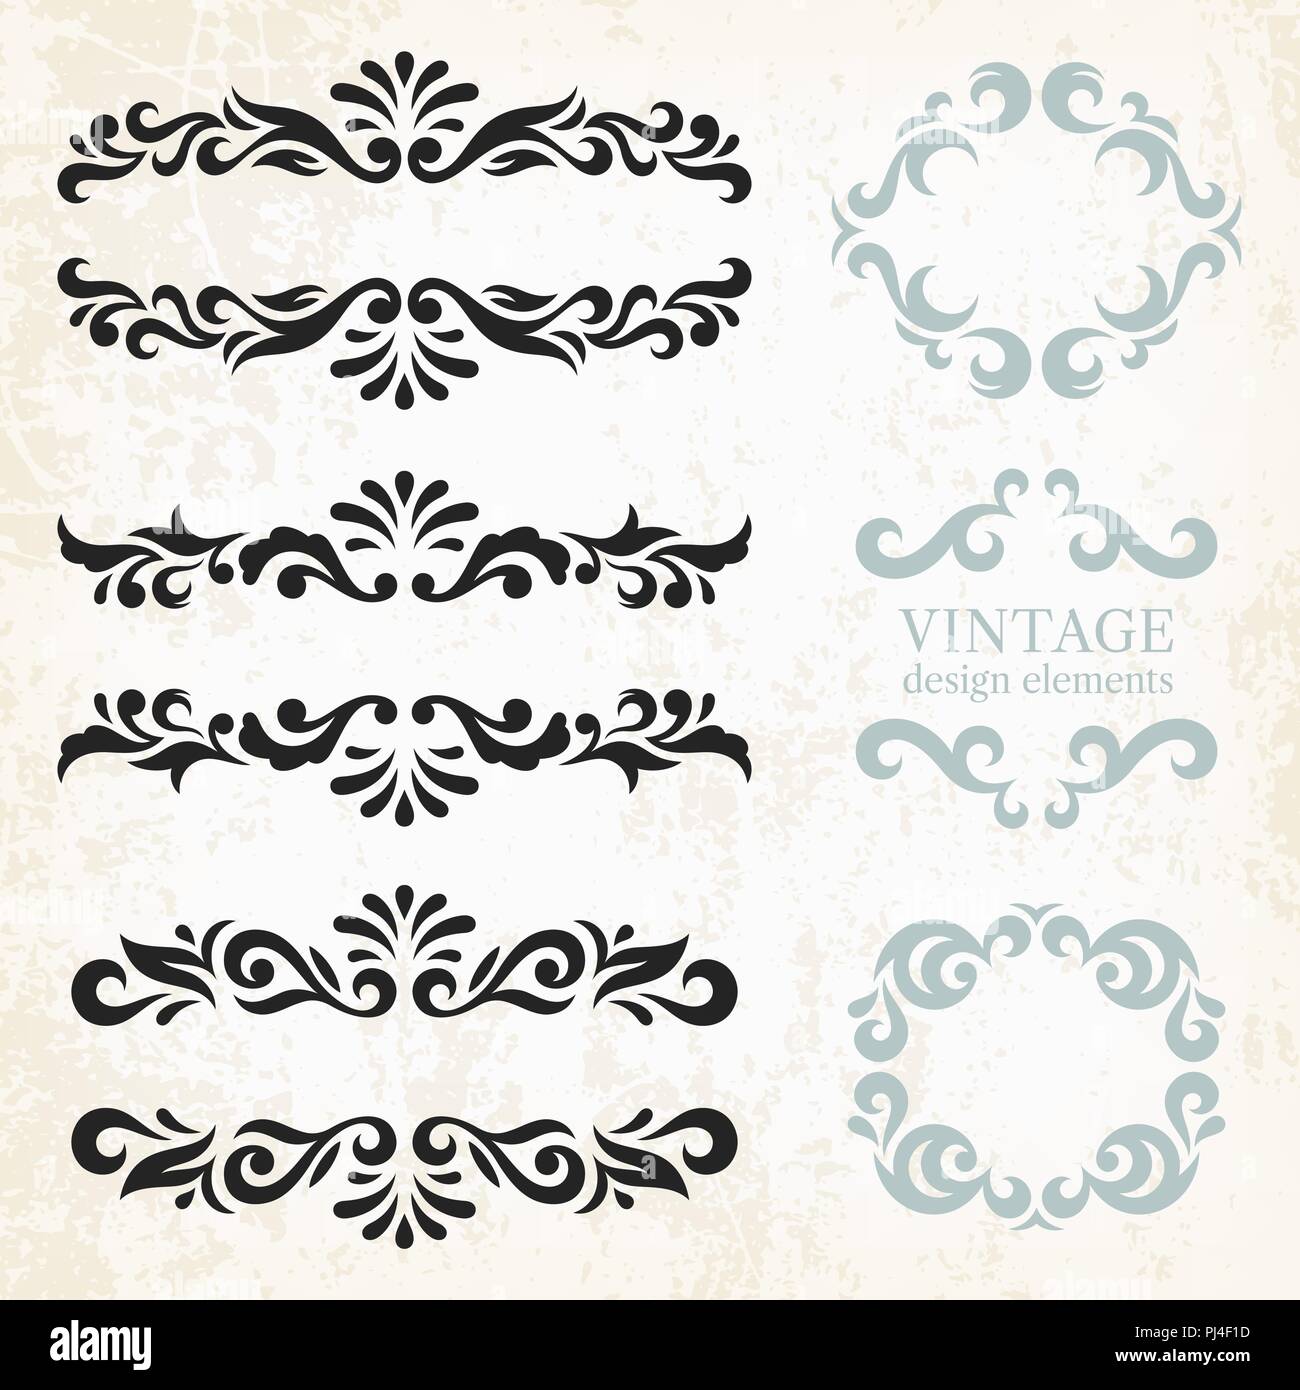 Vintage design elements and page decoration, set of ornate patterns in retro style Stock Vector